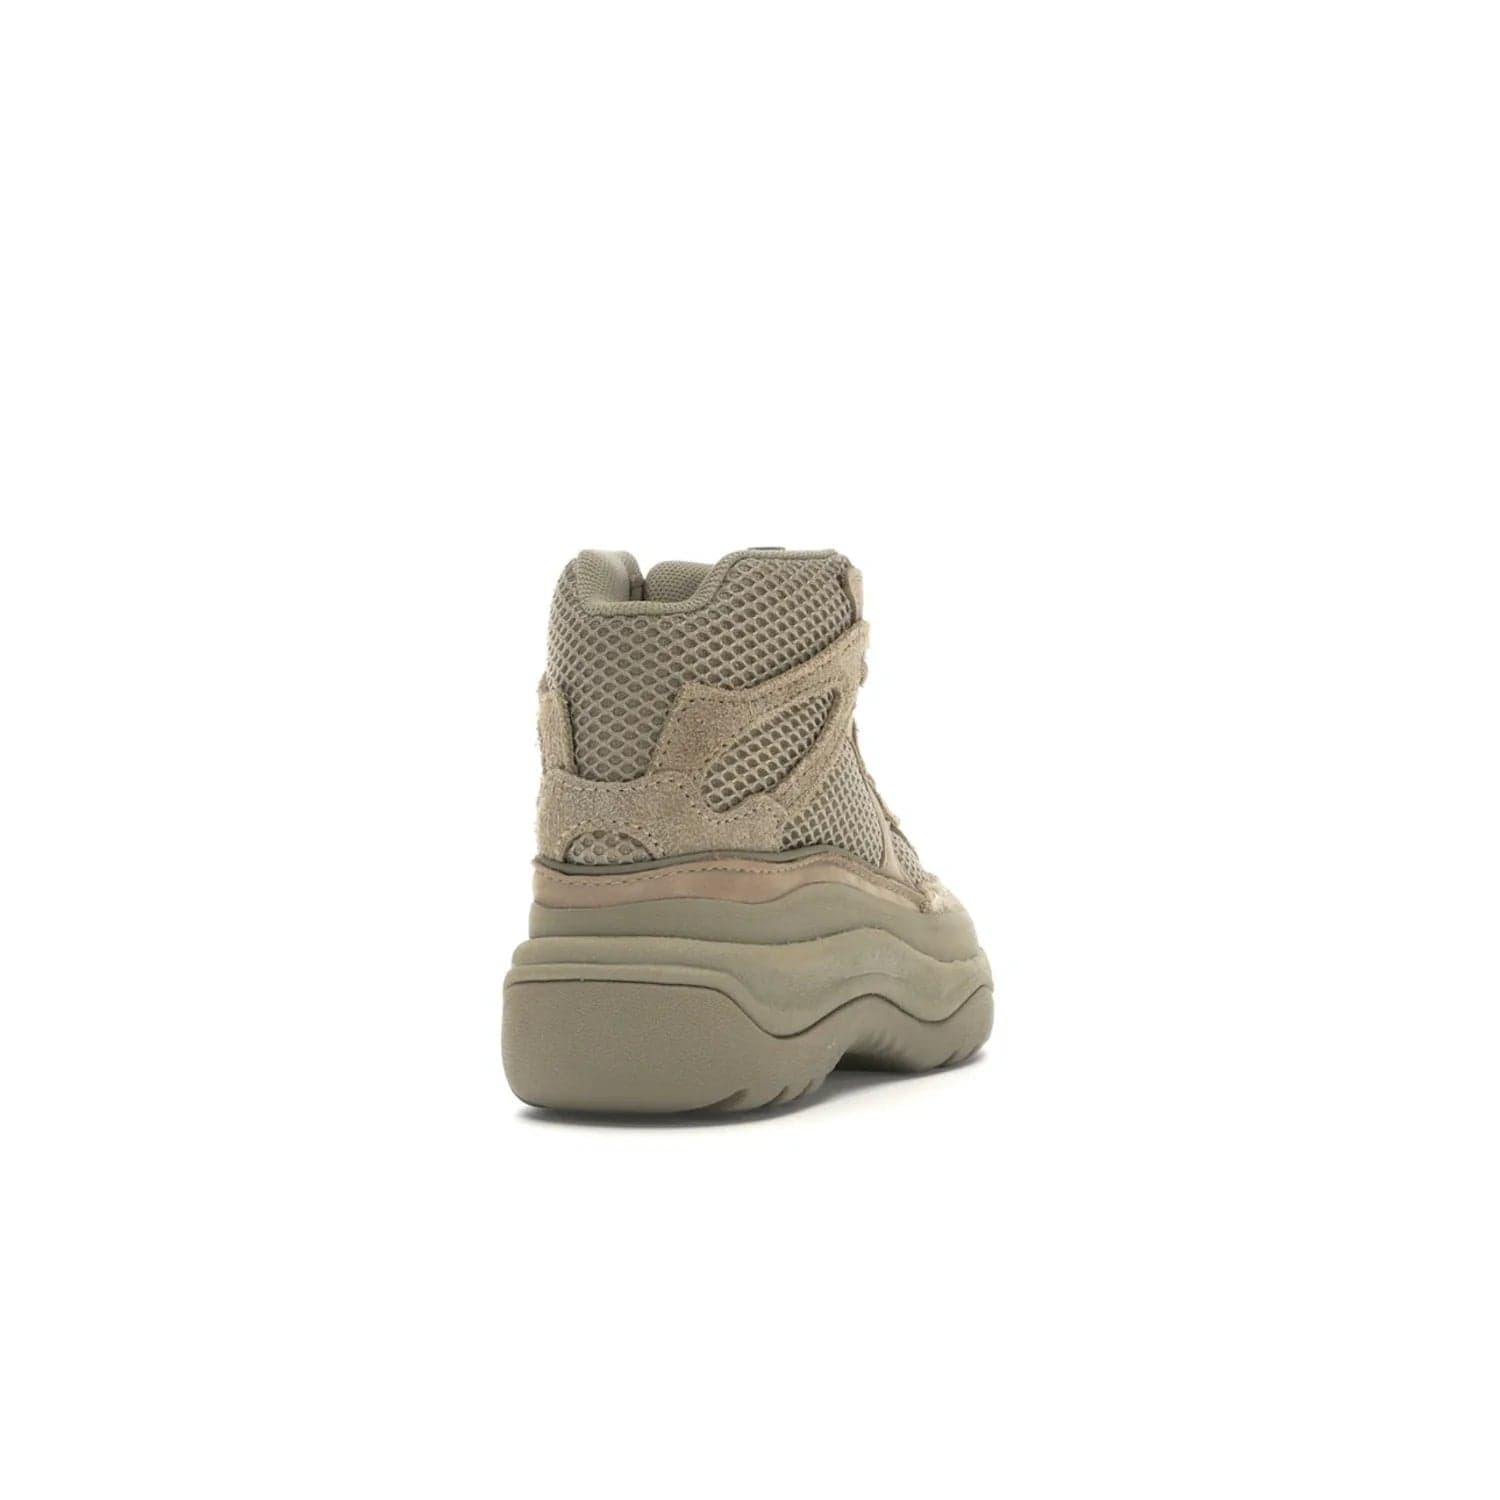 adidas Yeezy Desert Boot Rock (Kids) - Image 30 - Only at www.BallersClubKickz.com - Elevate your style this season with the adidas Yeezy Desert Boot Rock. Crafted from layered nylon and suede, this chic kids' silhouette features an EVA midsole and rubber outsole for superior cushioning and traction.